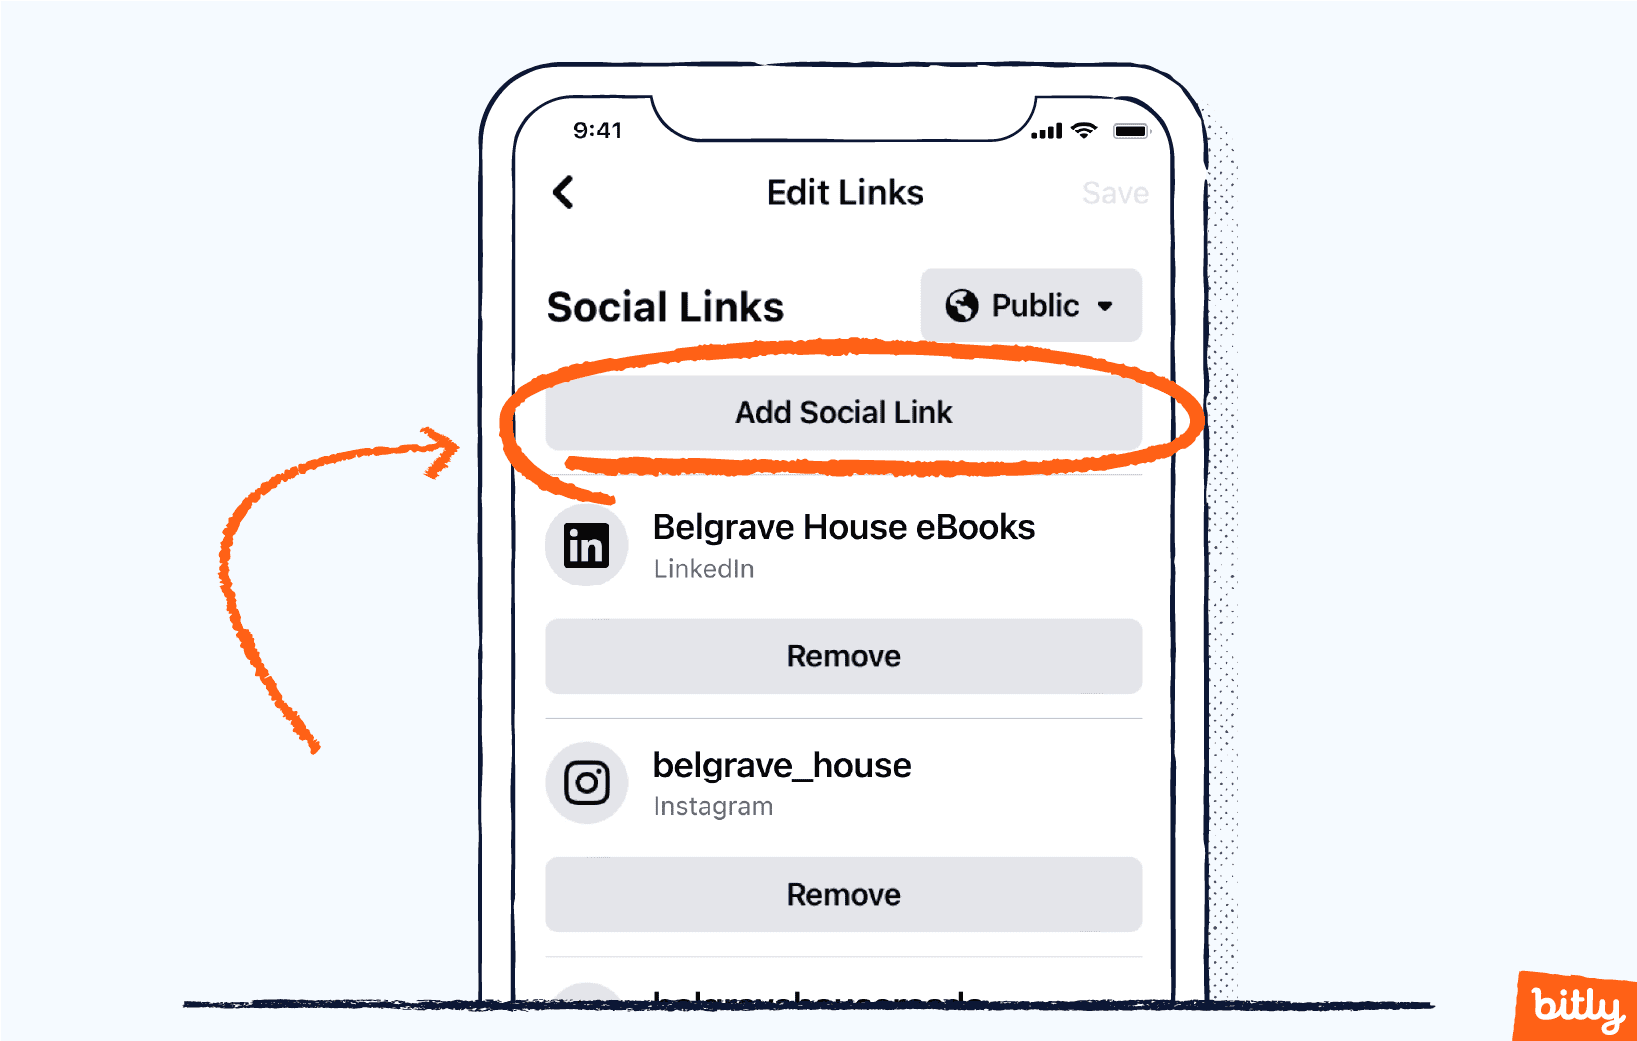 An orange arrow pointing to an Add Social Link button on a smartphone.